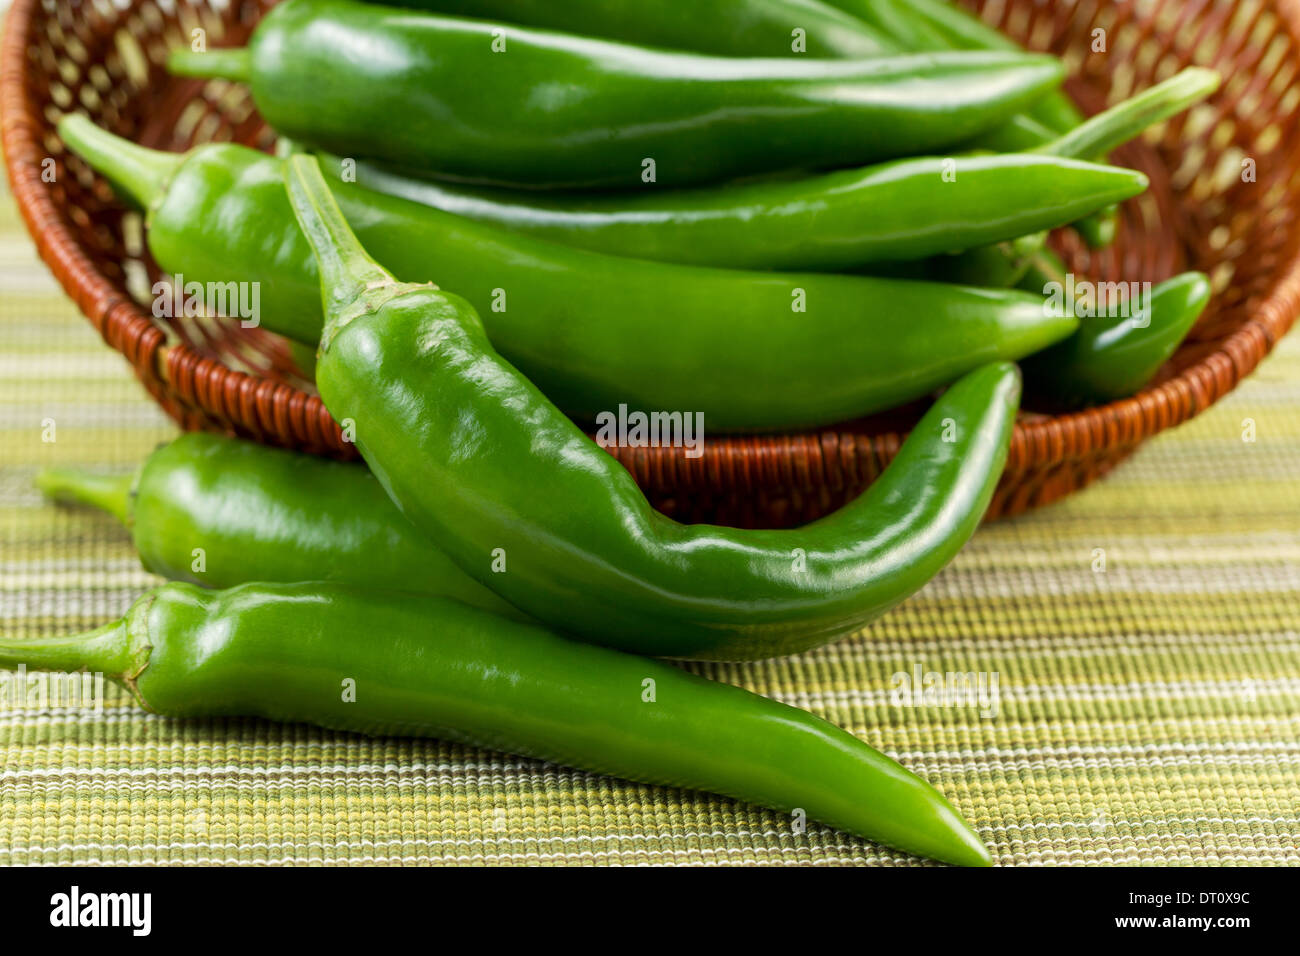 Closeup horizontal photo of fresh Korean Green Peppers falling out of basket with textured table cloth underneath Stock Photo